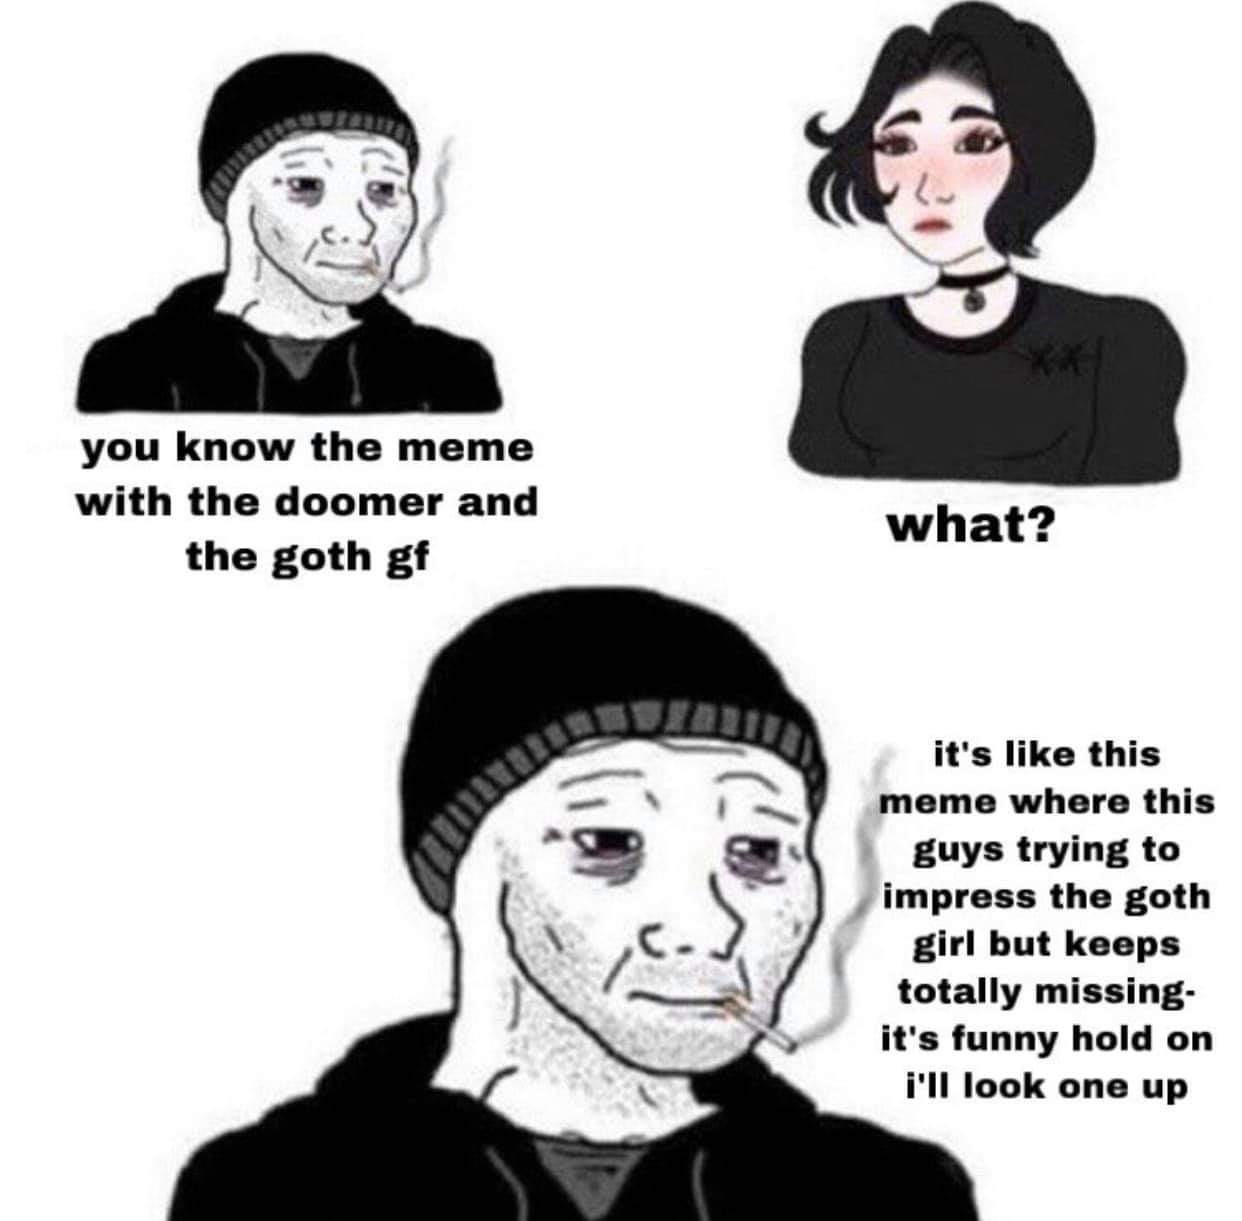 doomer girl meme - you know the meme with the doomer and the goth gf what? it's this meme where this guys trying to impress the goth girl but keeps totally missing it's funny hold on i'll look one up